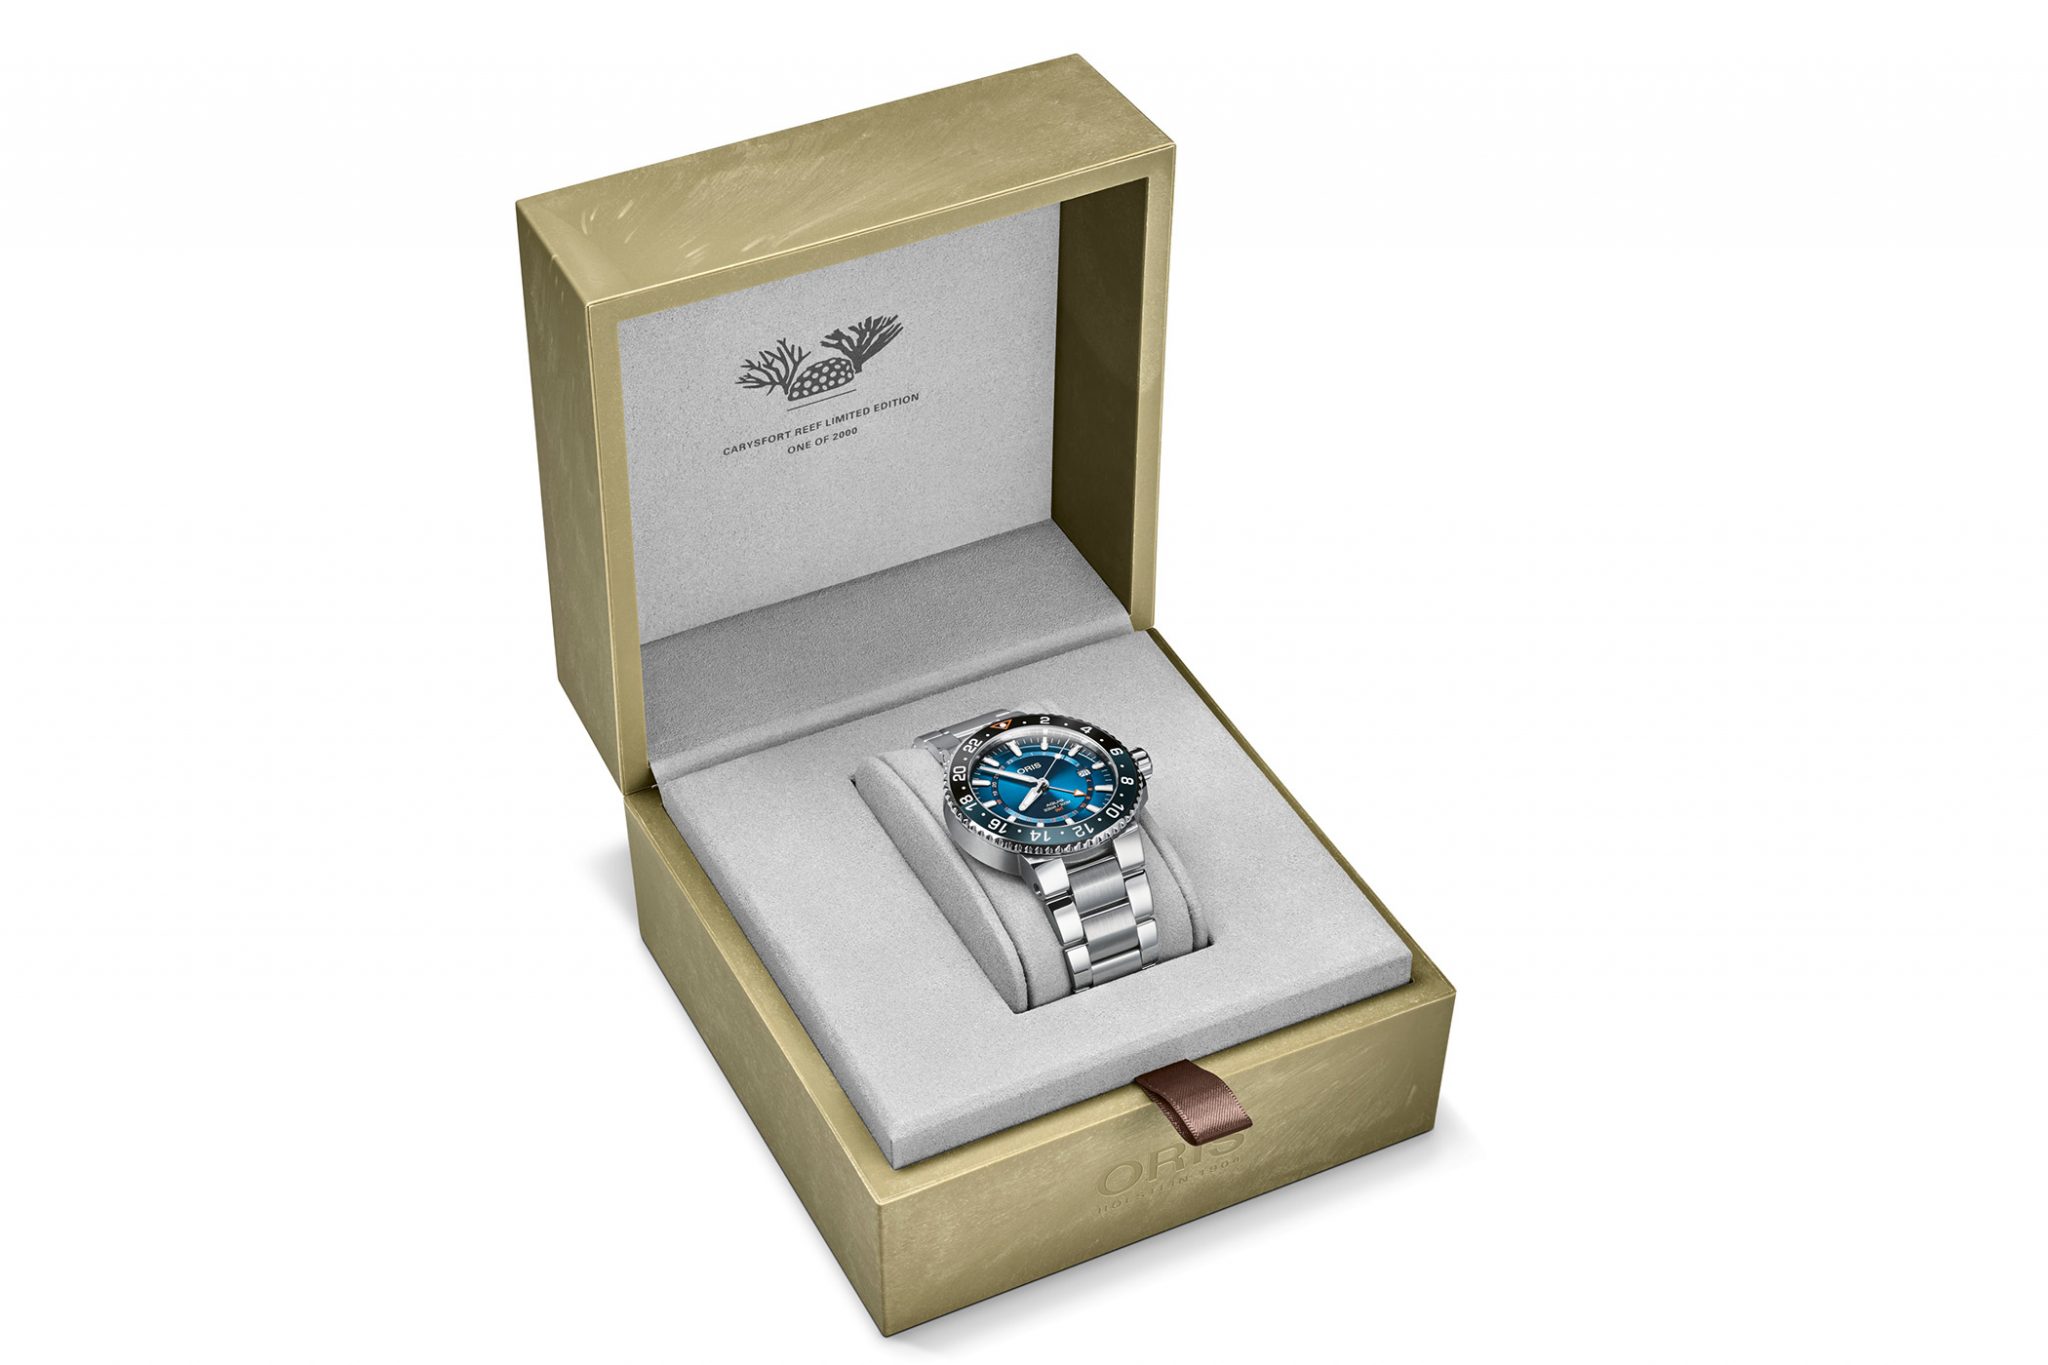 Oris-Carysfort-Reef-Limited-Edition-Support-Coral-Restoration-Foundation-ref-01-798-7754-4185